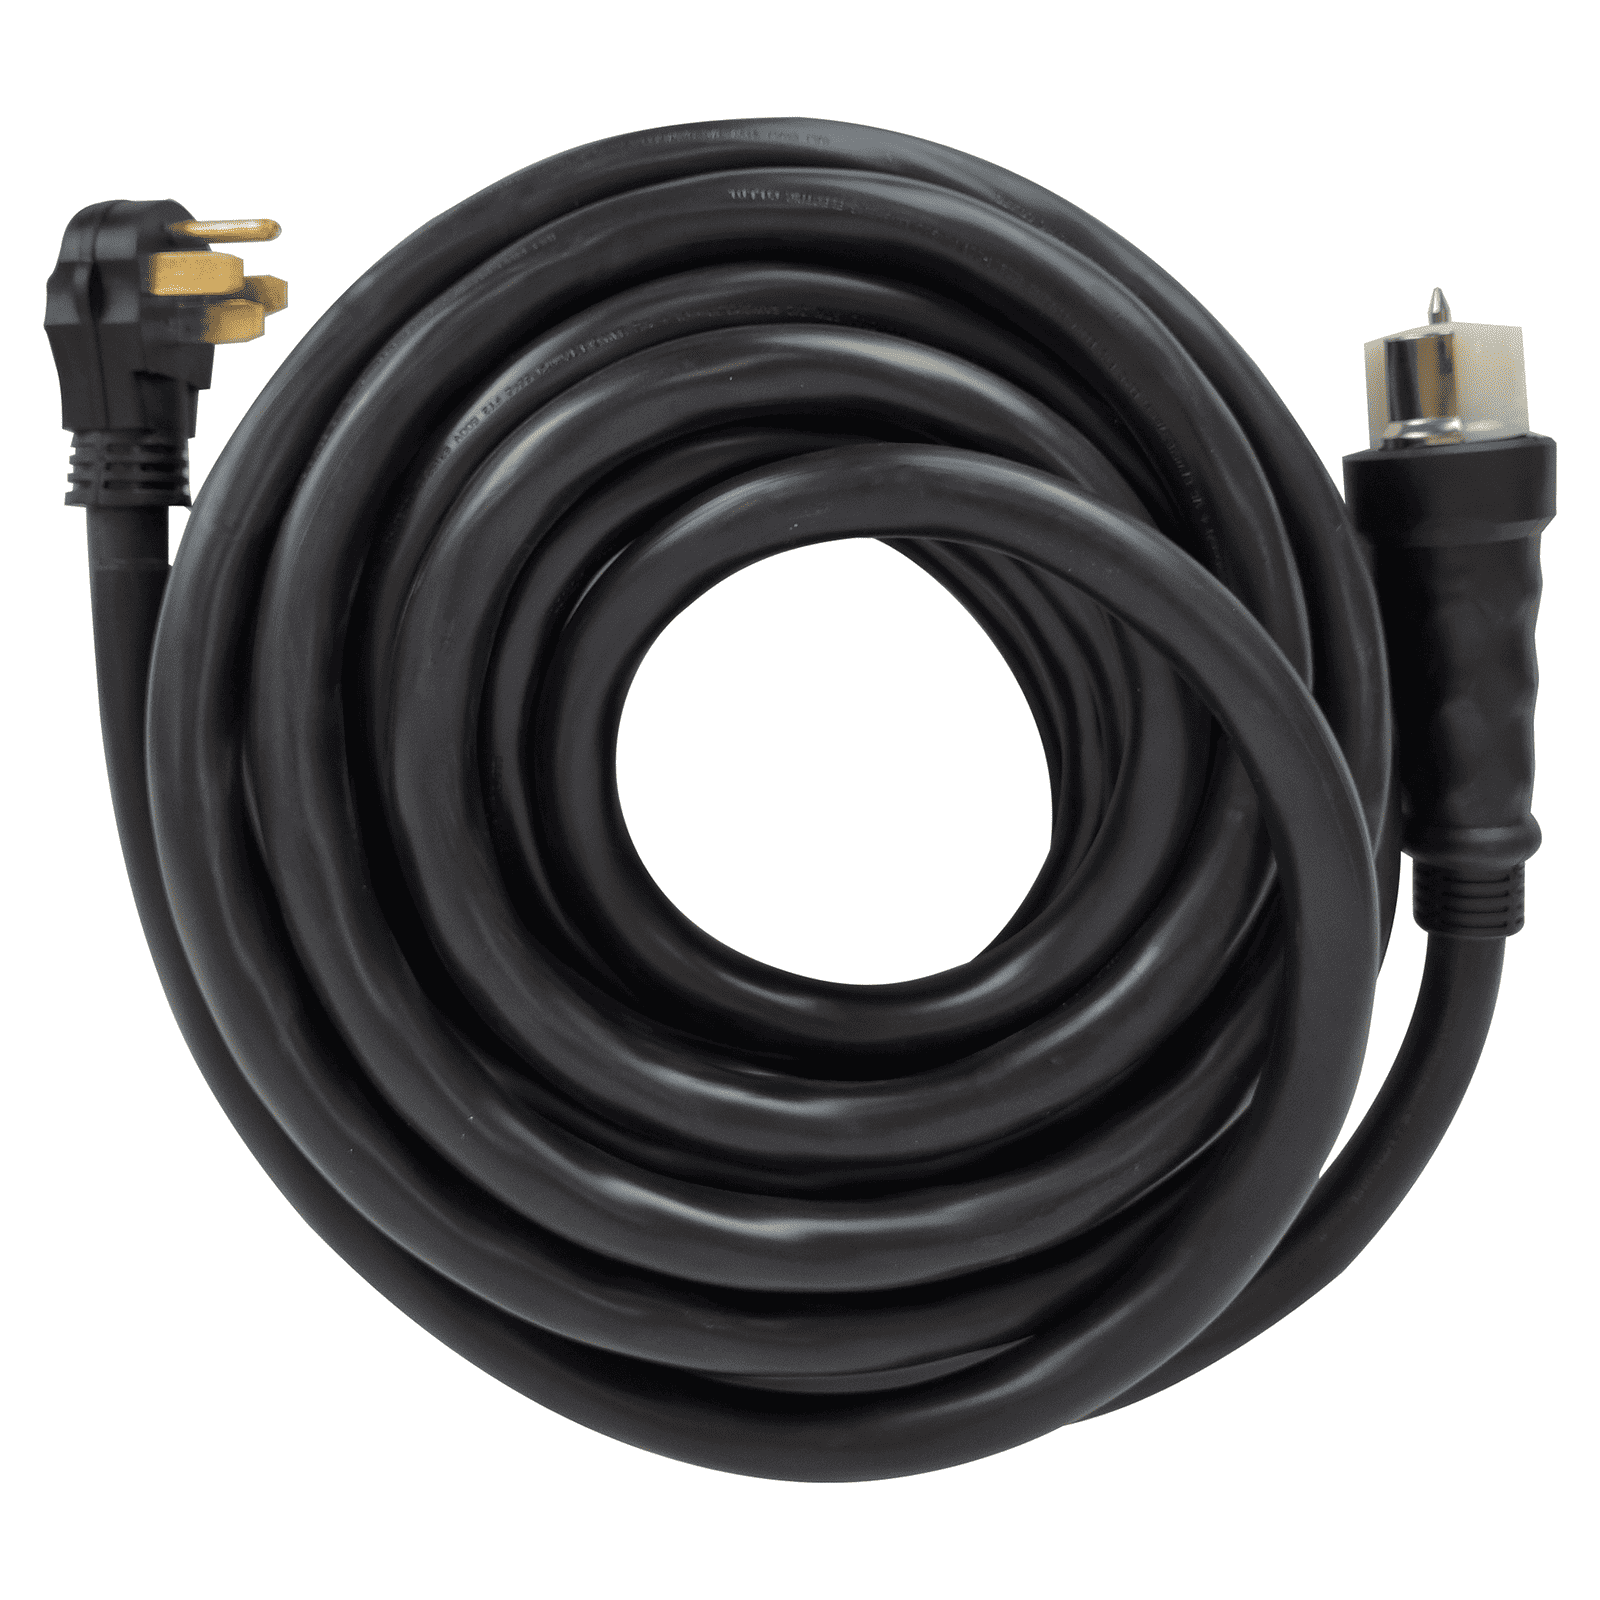 Coiled black DuroMax XP5050GC 50-Amp 6G 50′ 14-50 CS6364 Home Generator Power Cord with a three-prong plug on one end and a male HDMI connector on the other.